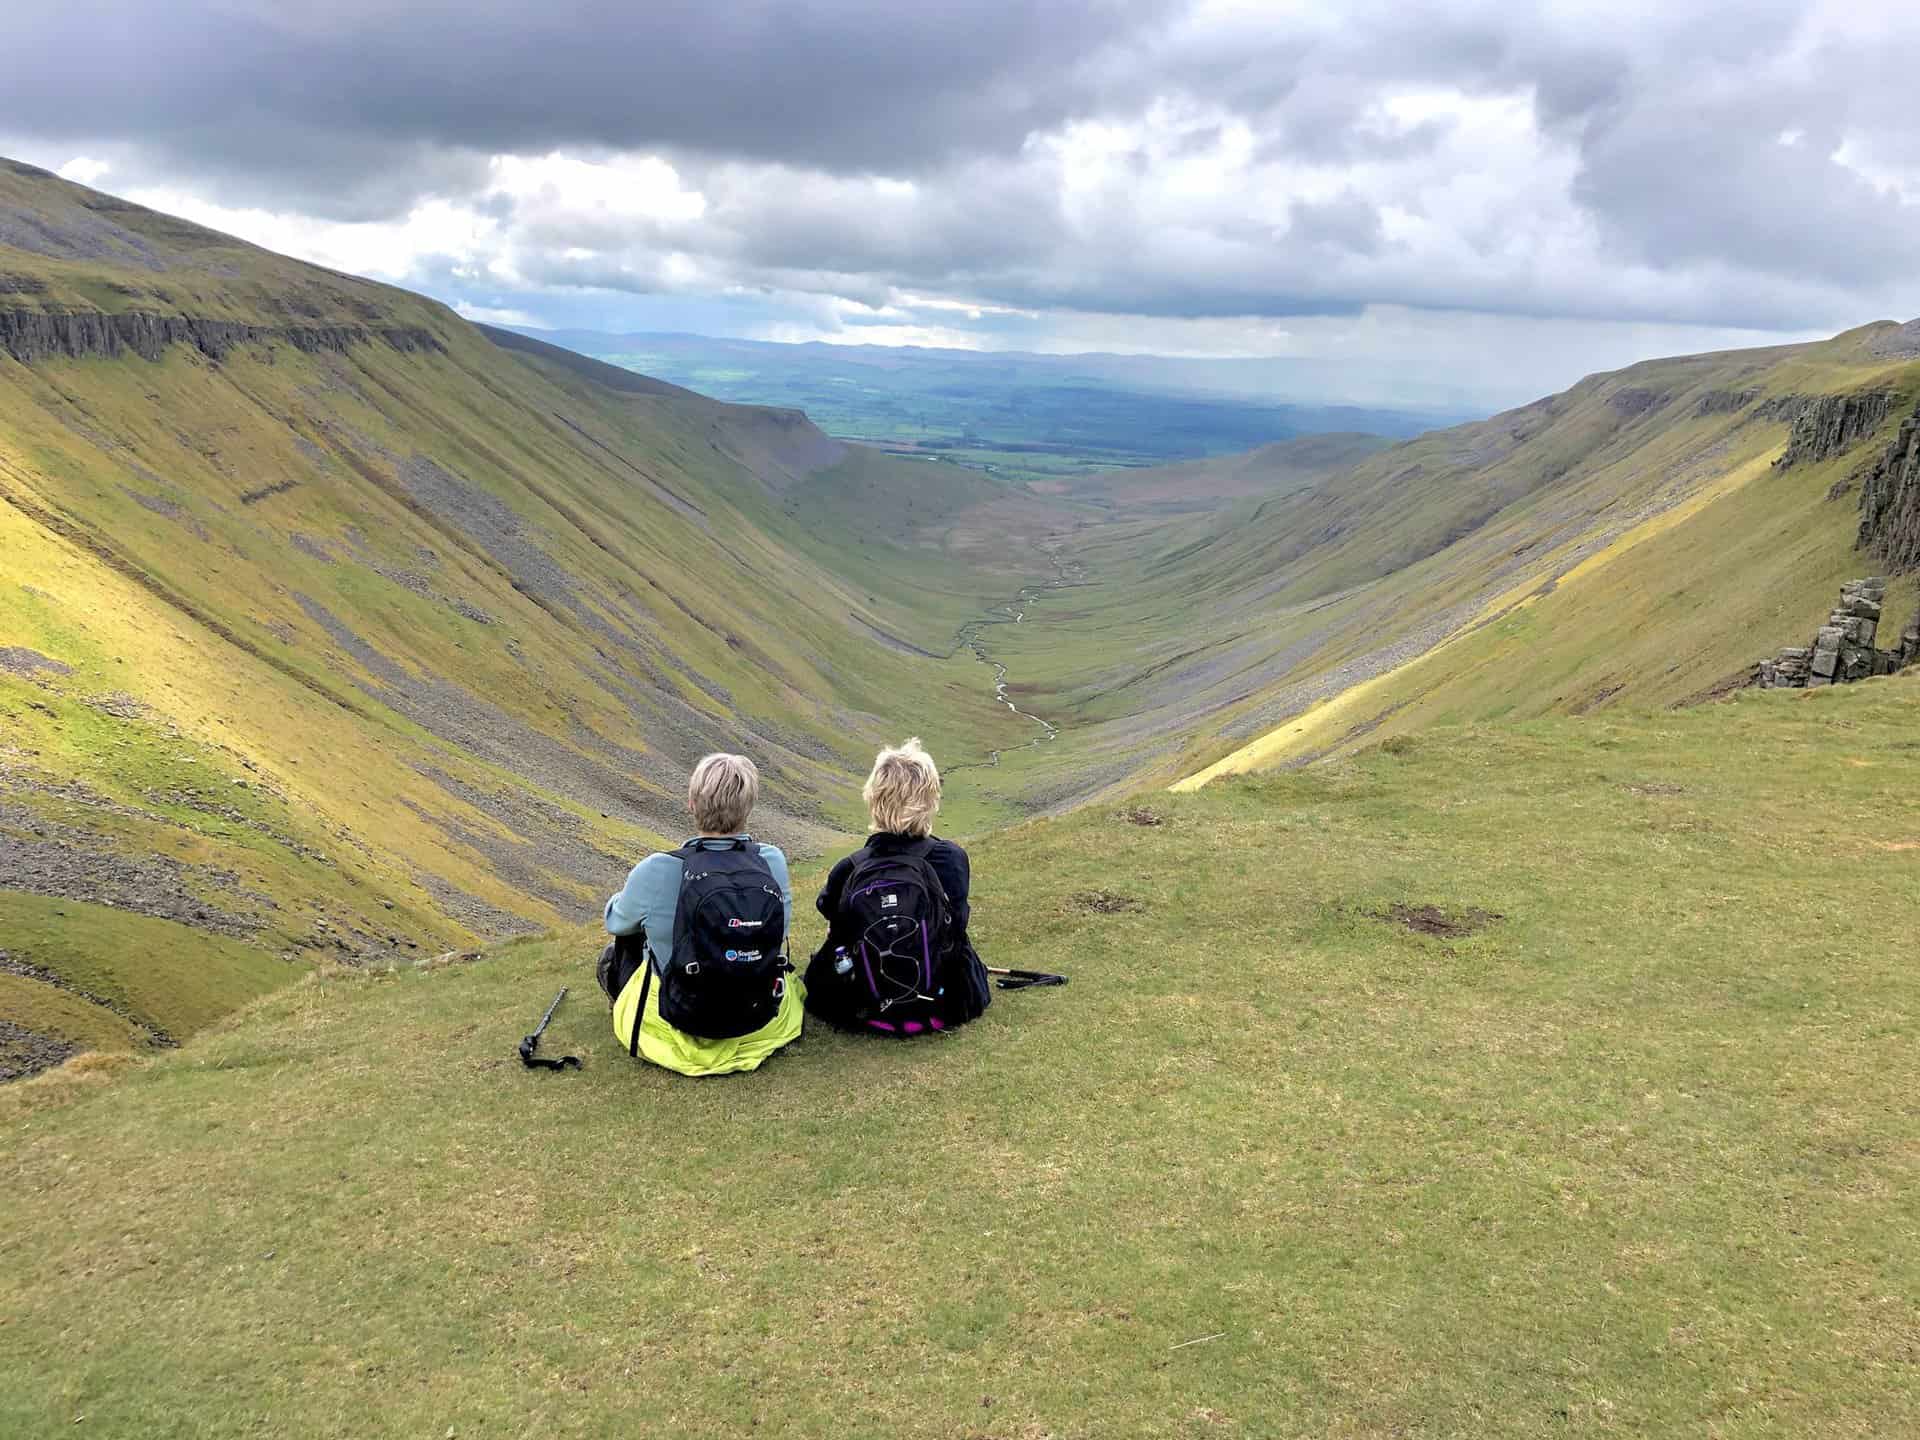 Taking a moment to sit and immerse ourselves in the incredible views and serene atmosphere. Such peaceful moments are what make the High Cup Nick walk truly unforgettable.